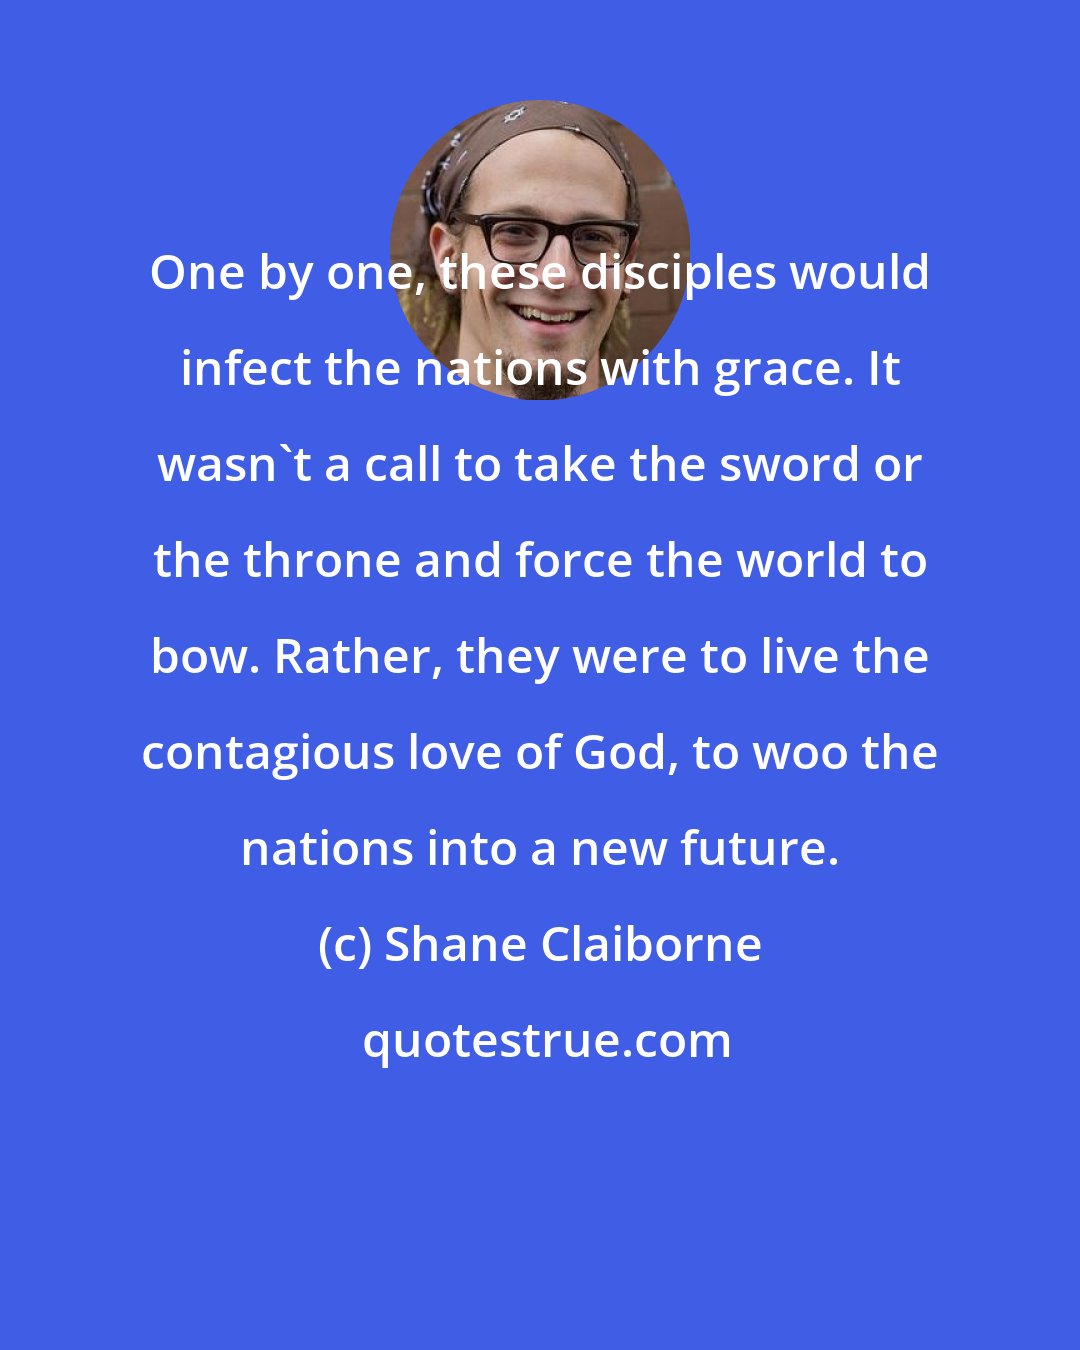 Shane Claiborne: One by one, these disciples would infect the nations with grace. It wasn't a call to take the sword or the throne and force the world to bow. Rather, they were to live the contagious love of God, to woo the nations into a new future.